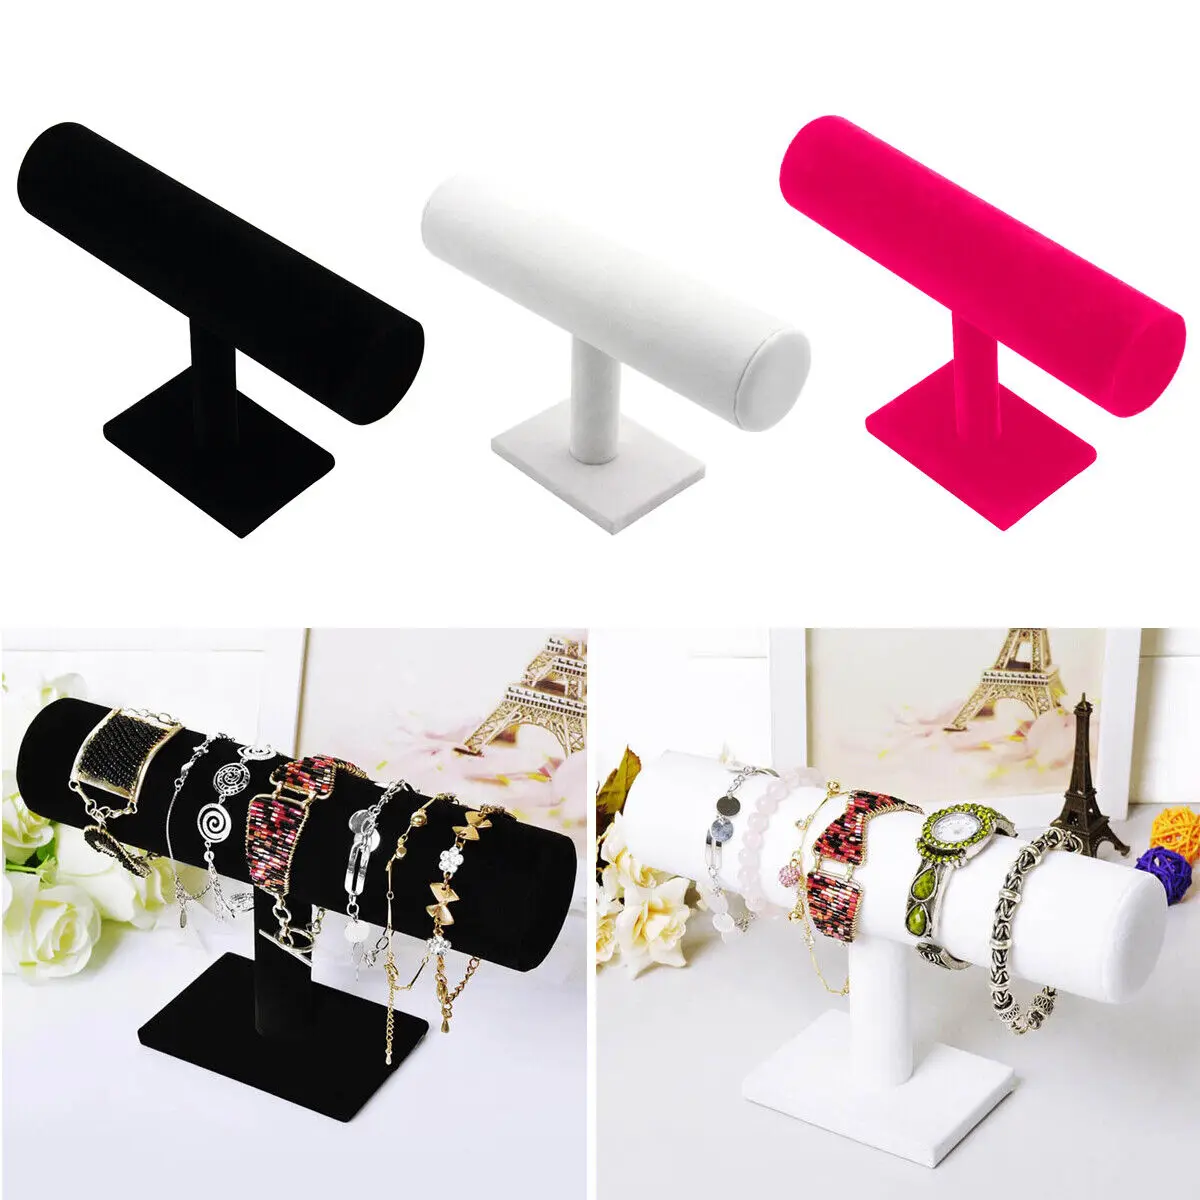 Single Tier Velvet Bracelet Chain Watch T-Bar Rack Jewelry Hard Display Stand Holder Jewelry Organizer High Qualitydisplay Stand vintage natural unpainted wood finger cone ring holder bague jewelry display stand organizer storage rack showcase for exhibit